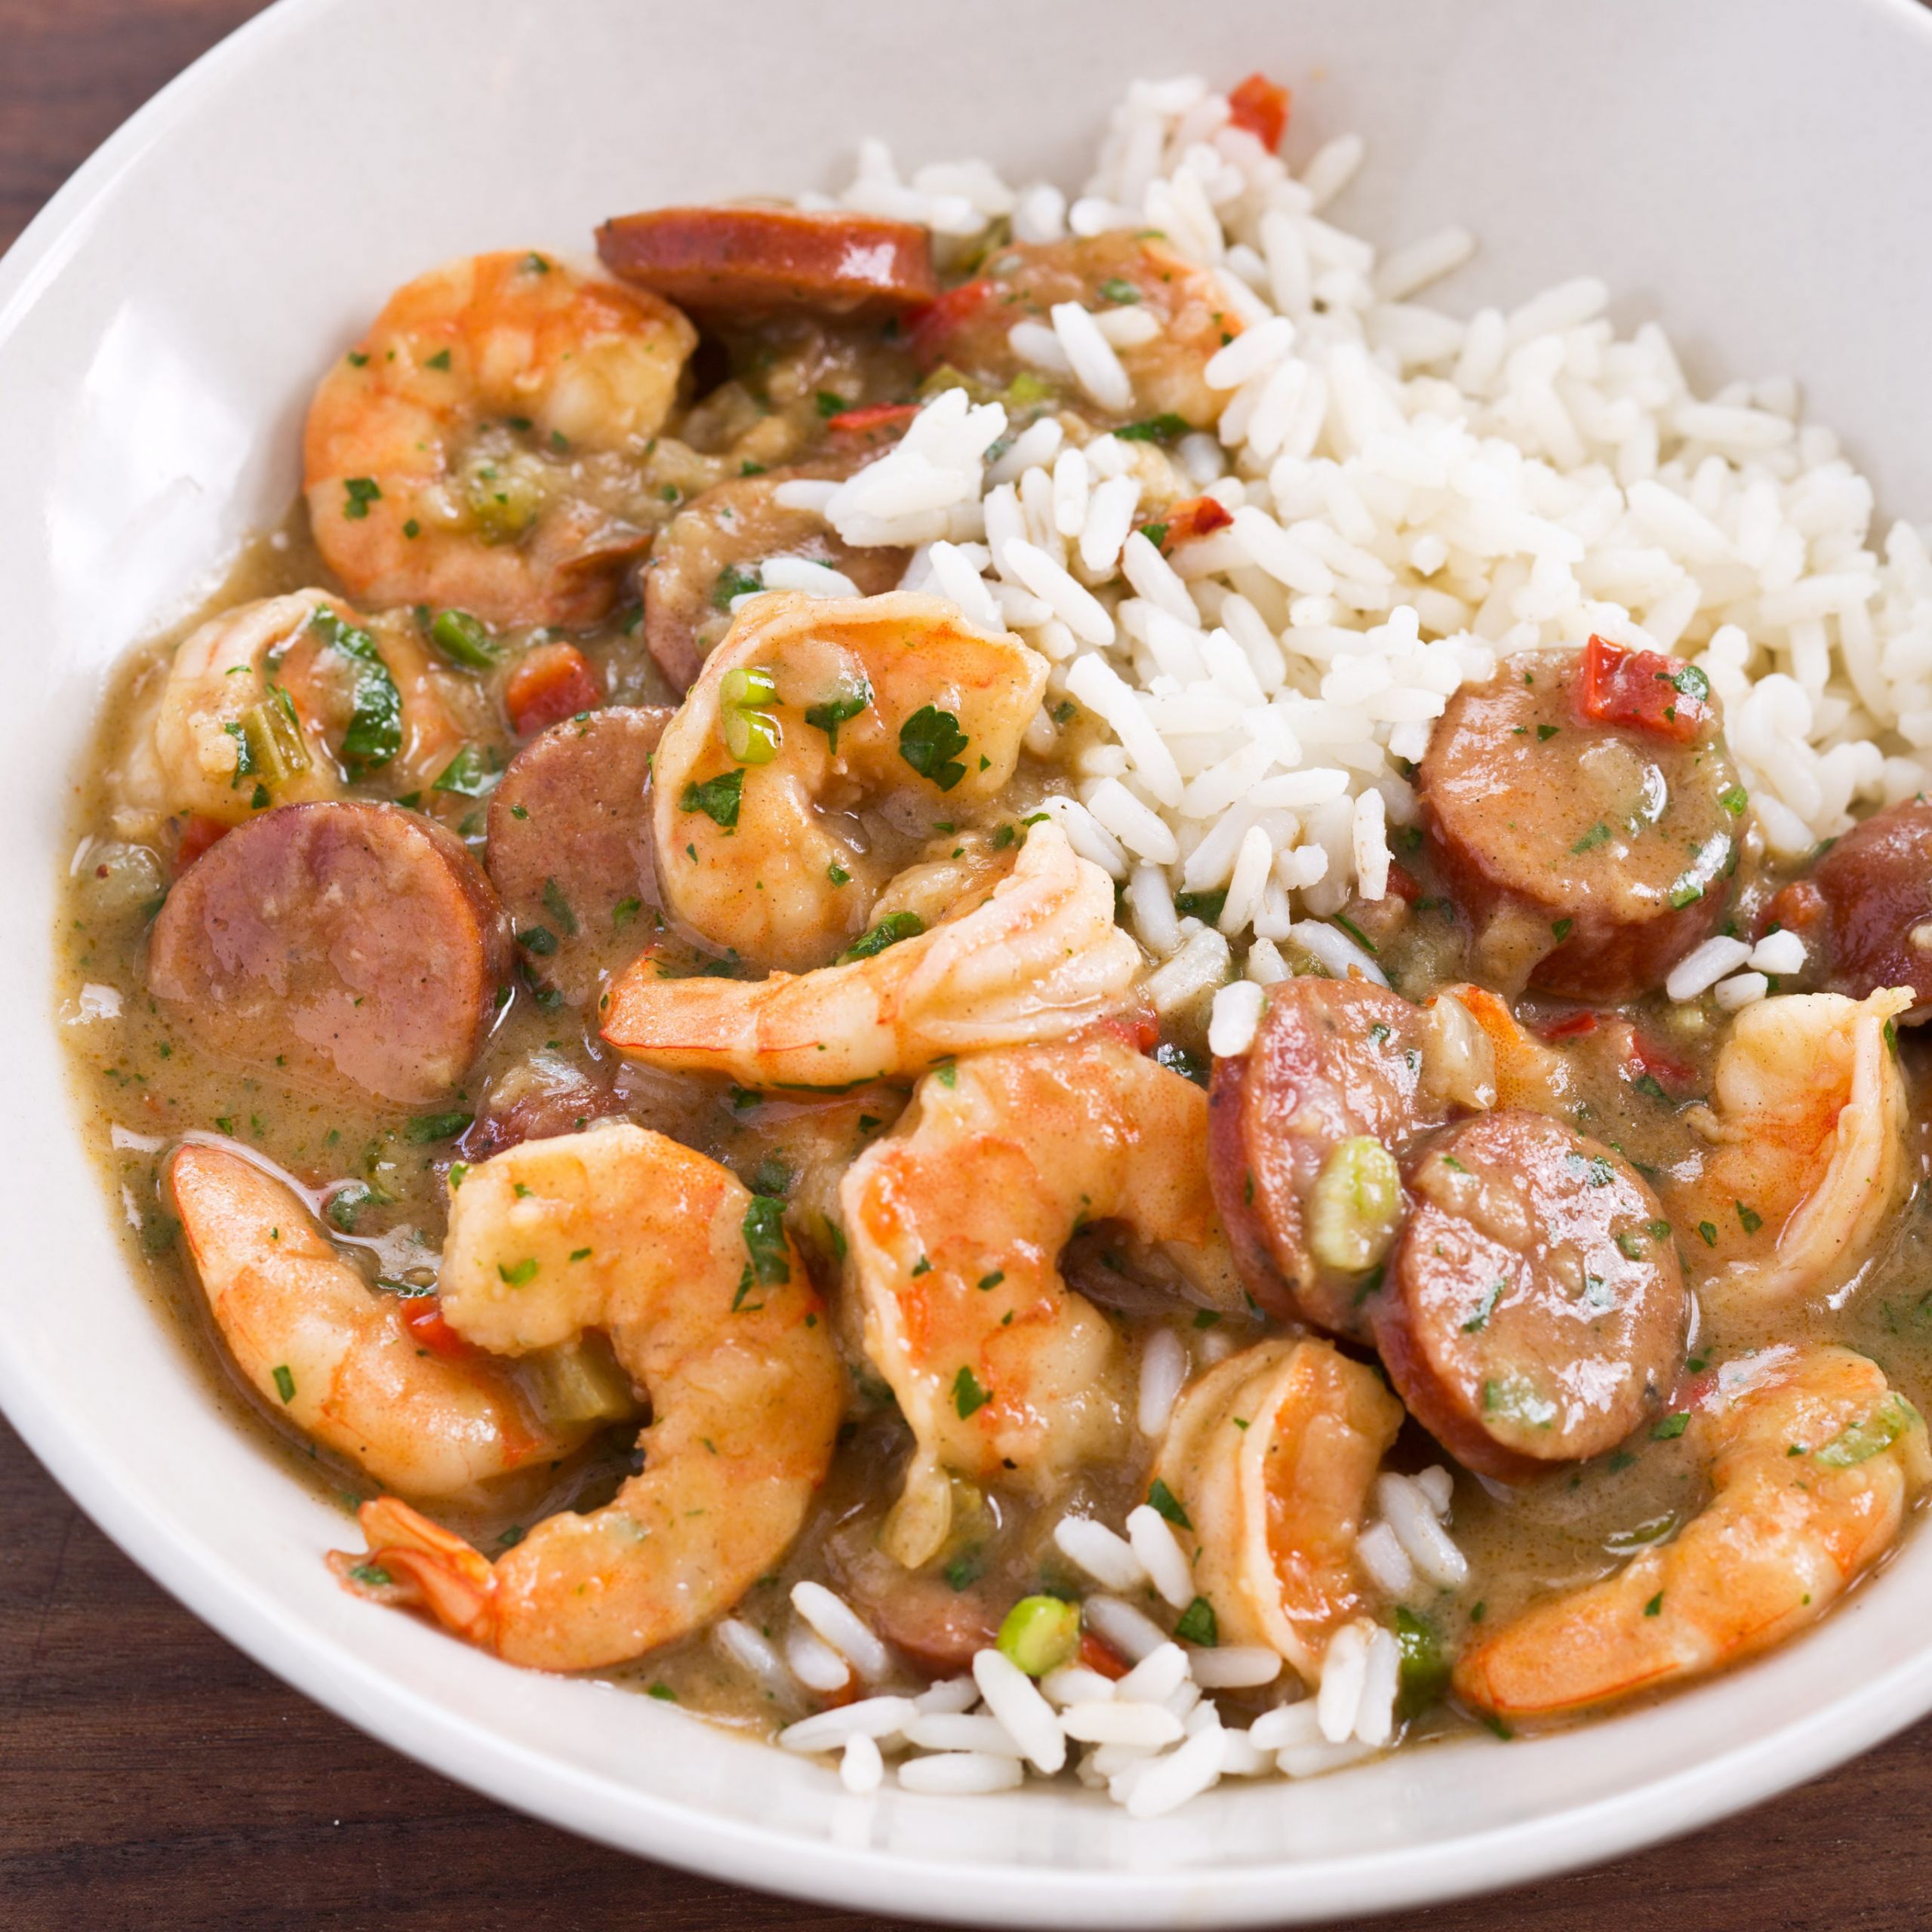 Gumbo Recipe Seafood Chicken And Sausage
 Creole Style Shrimp and Sausage Gumbo